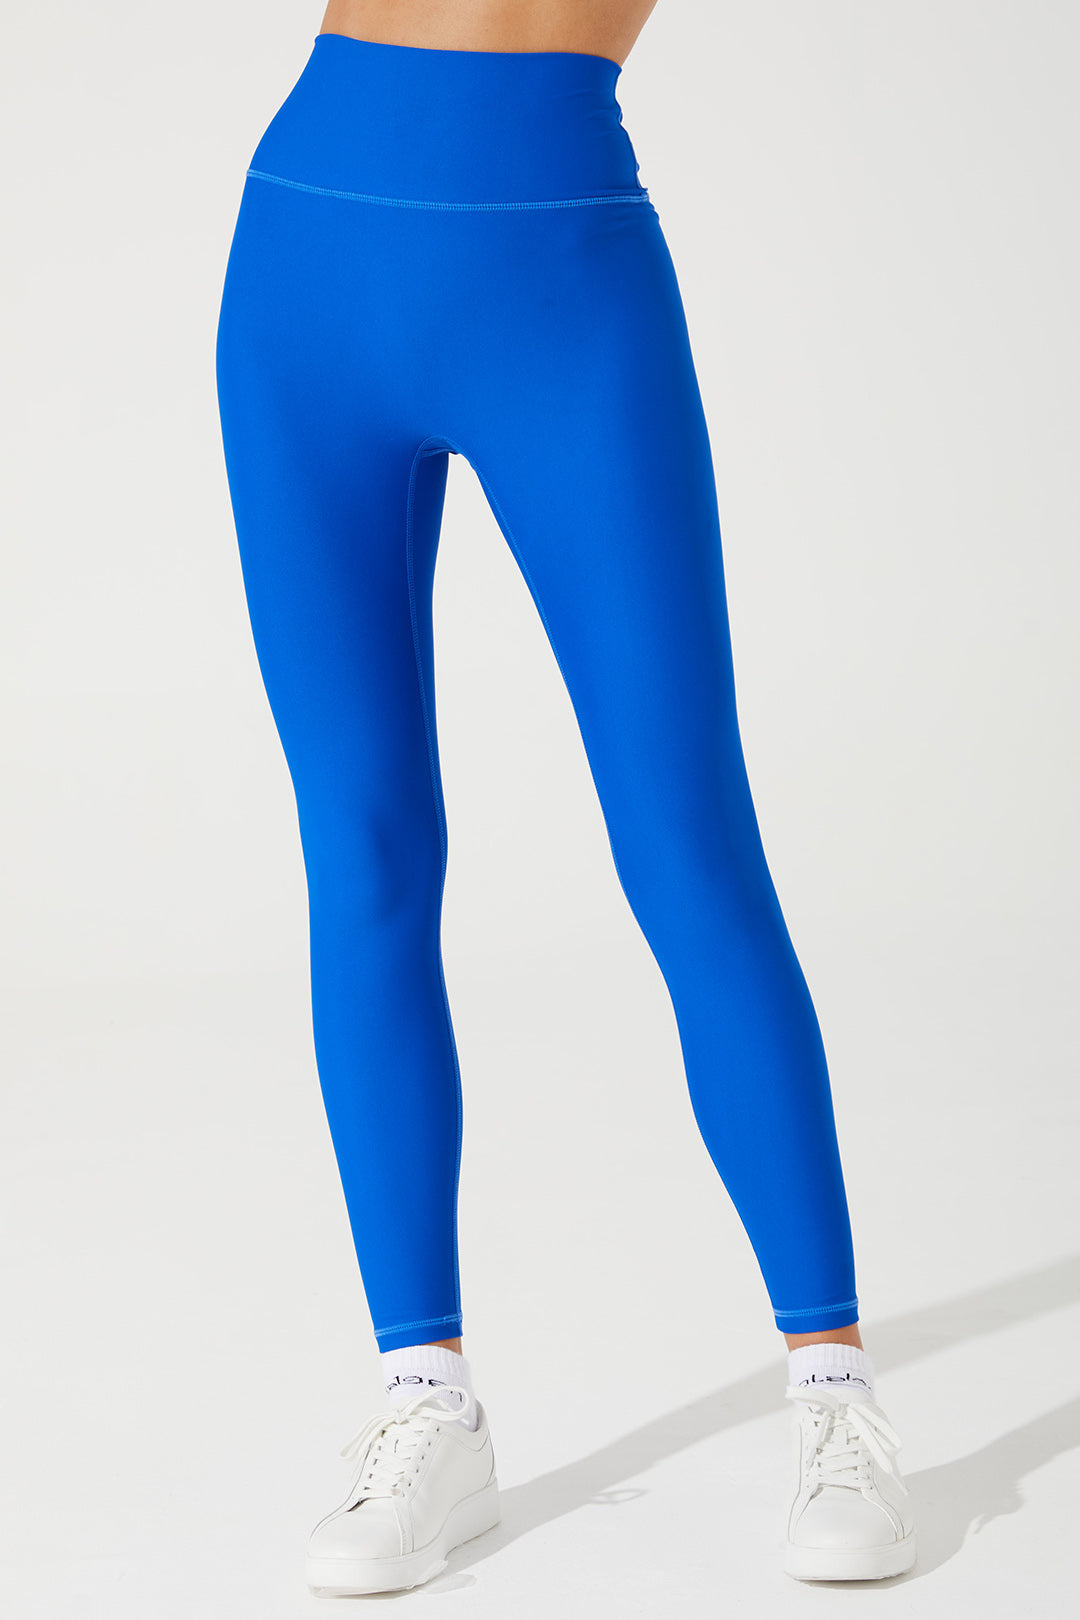 Stylish Atlantis Blue women's leggings, perfect for any occasion, available in size 2.